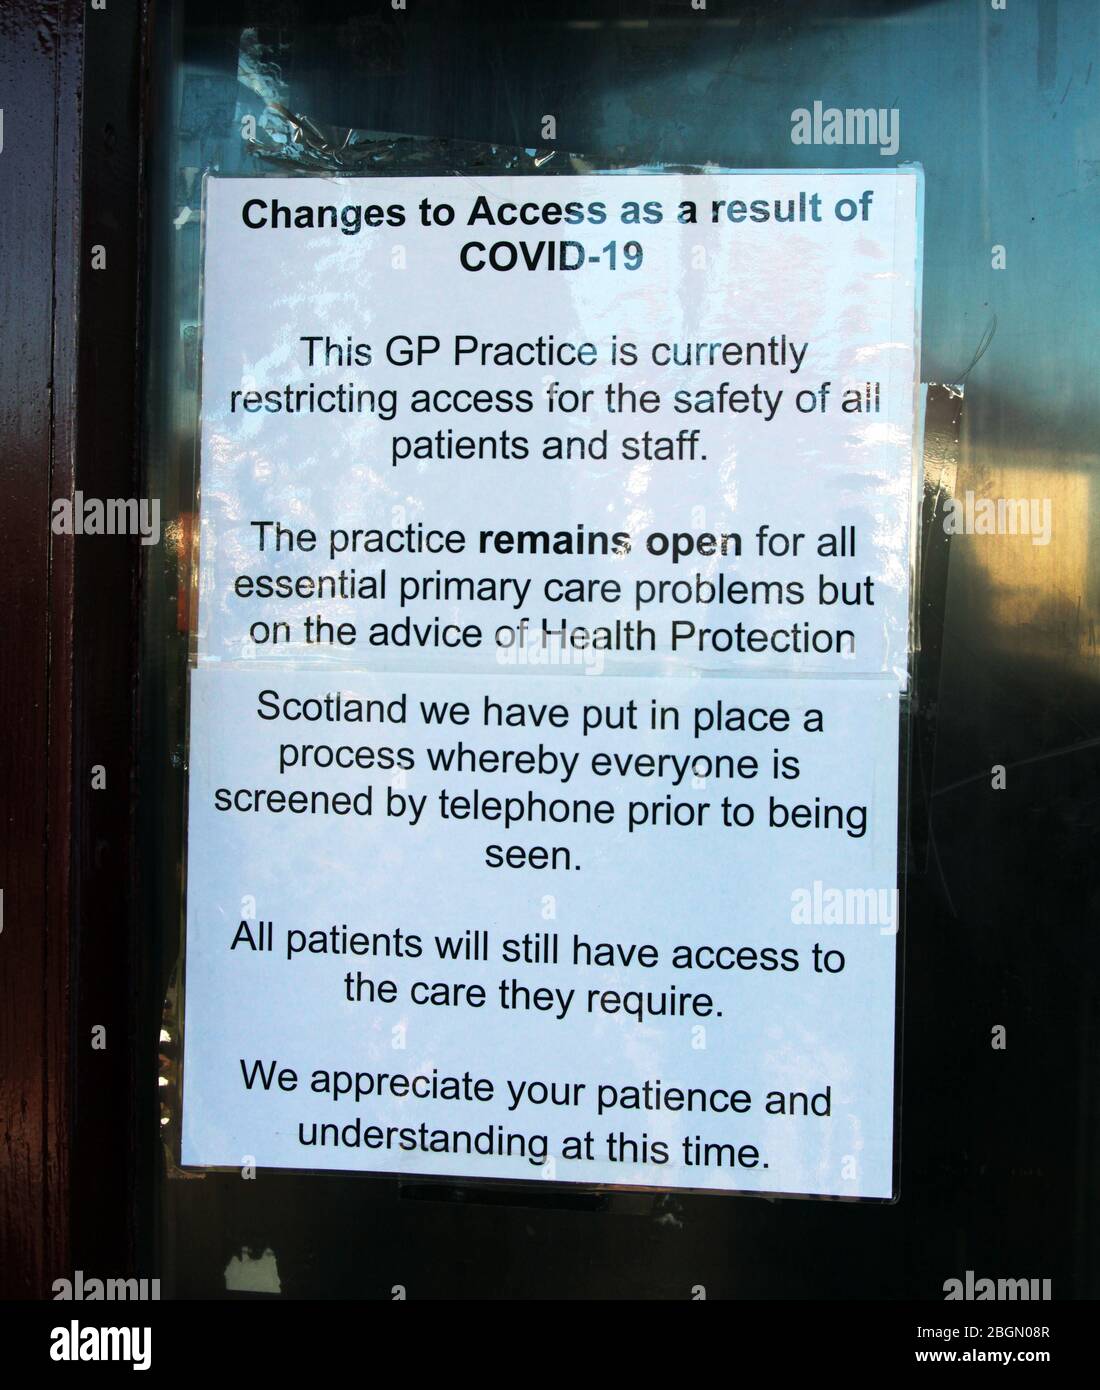 A notice, on the door of a medical practice, advises patients that it s closed and patients cannot enter, but, should telephone instead. This precaution is because of the widespread nature of the Covid-19 and coronavirus that is rampaging through Britain. Glasgow. April 2020. ALAN WYLIE/ALAMY© Stock Photo